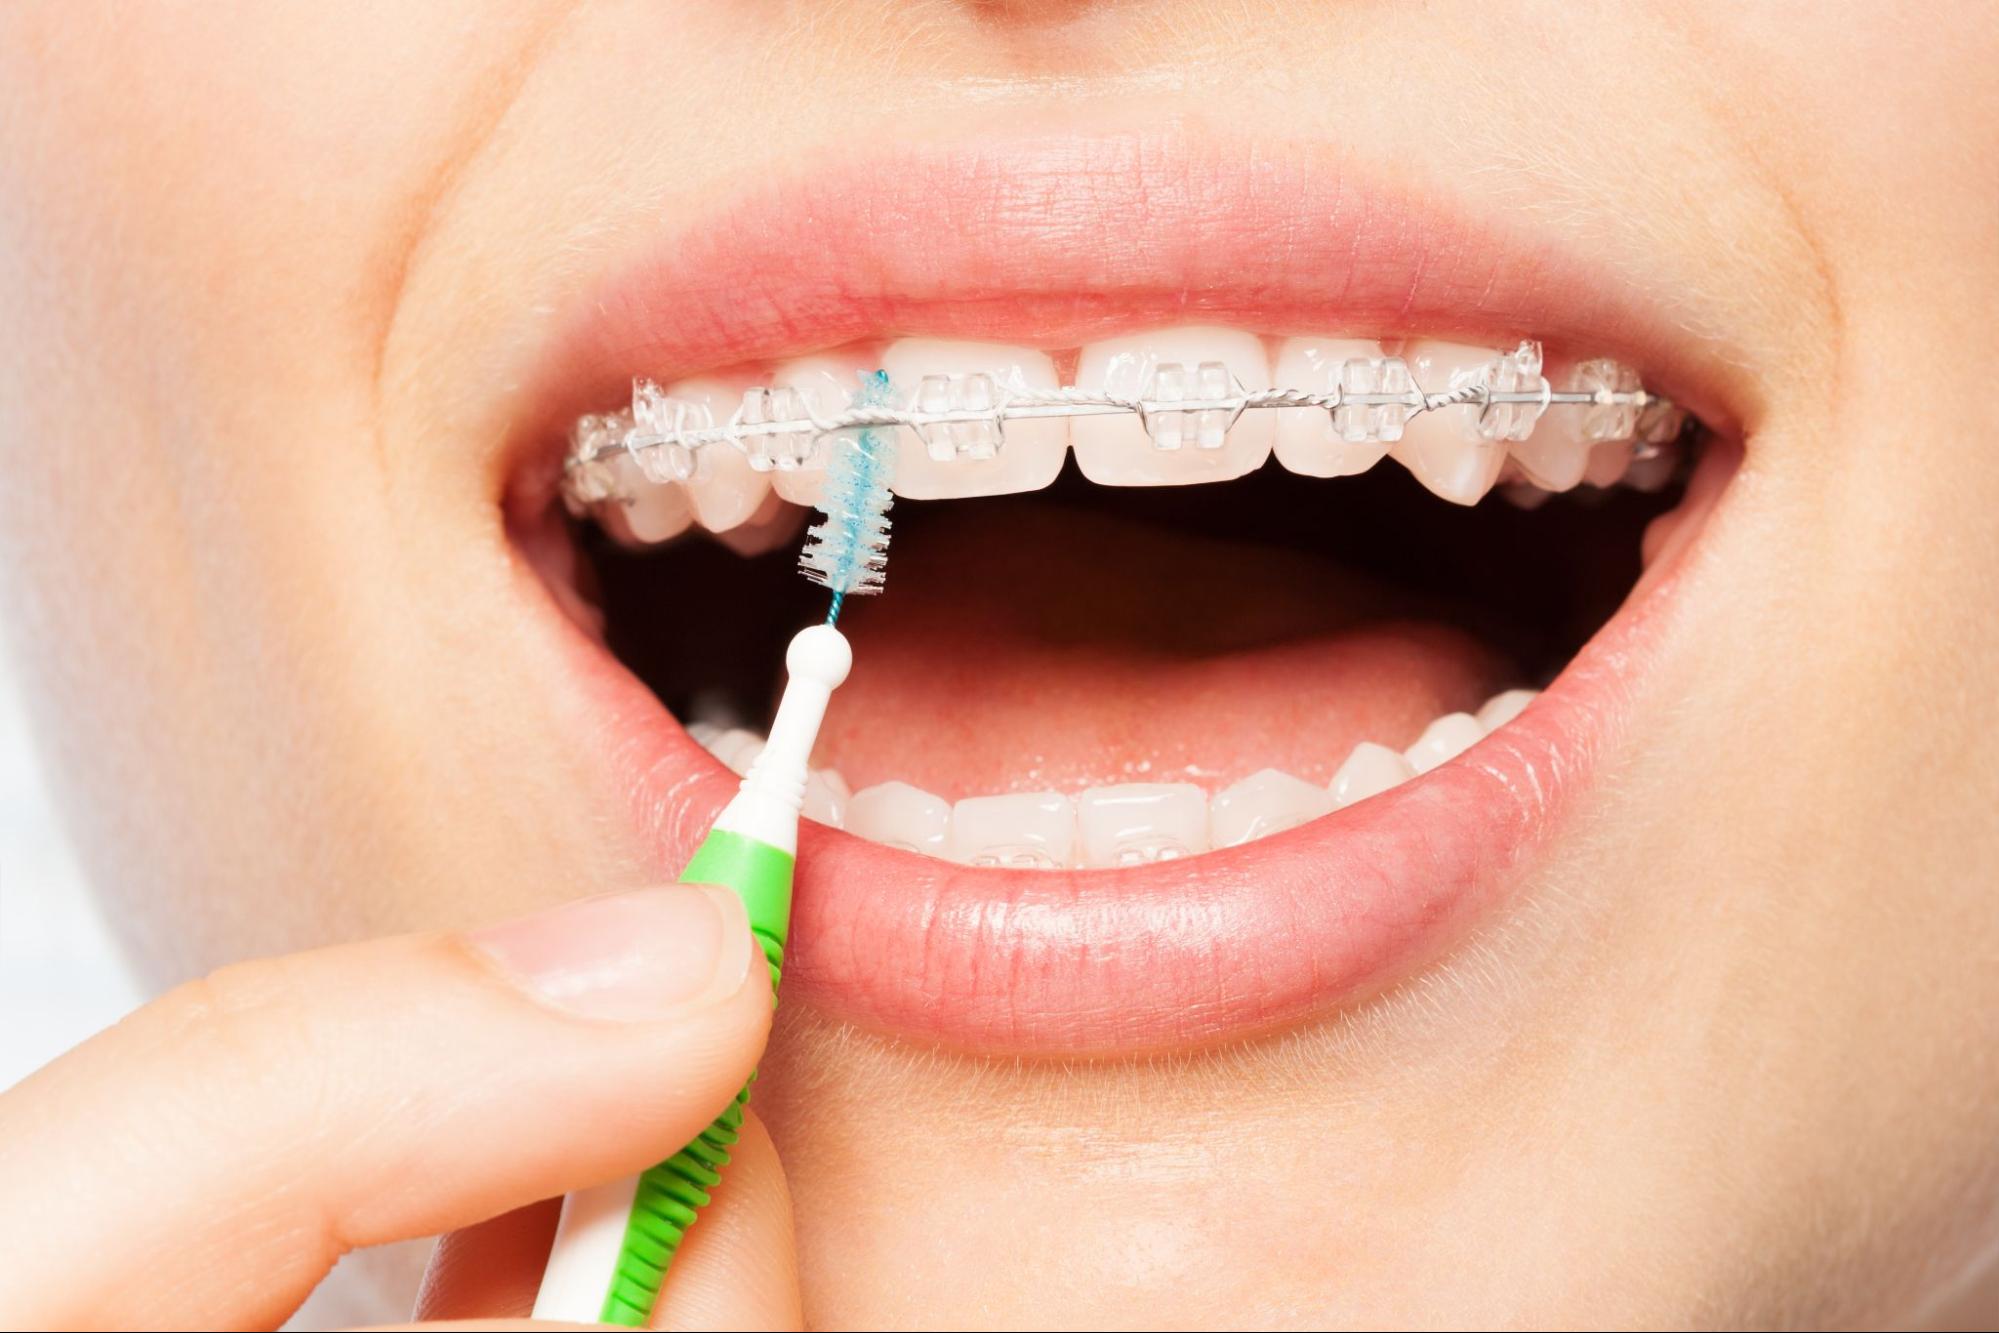 How Can I Prevent Bad Breath While Wearing Braces?